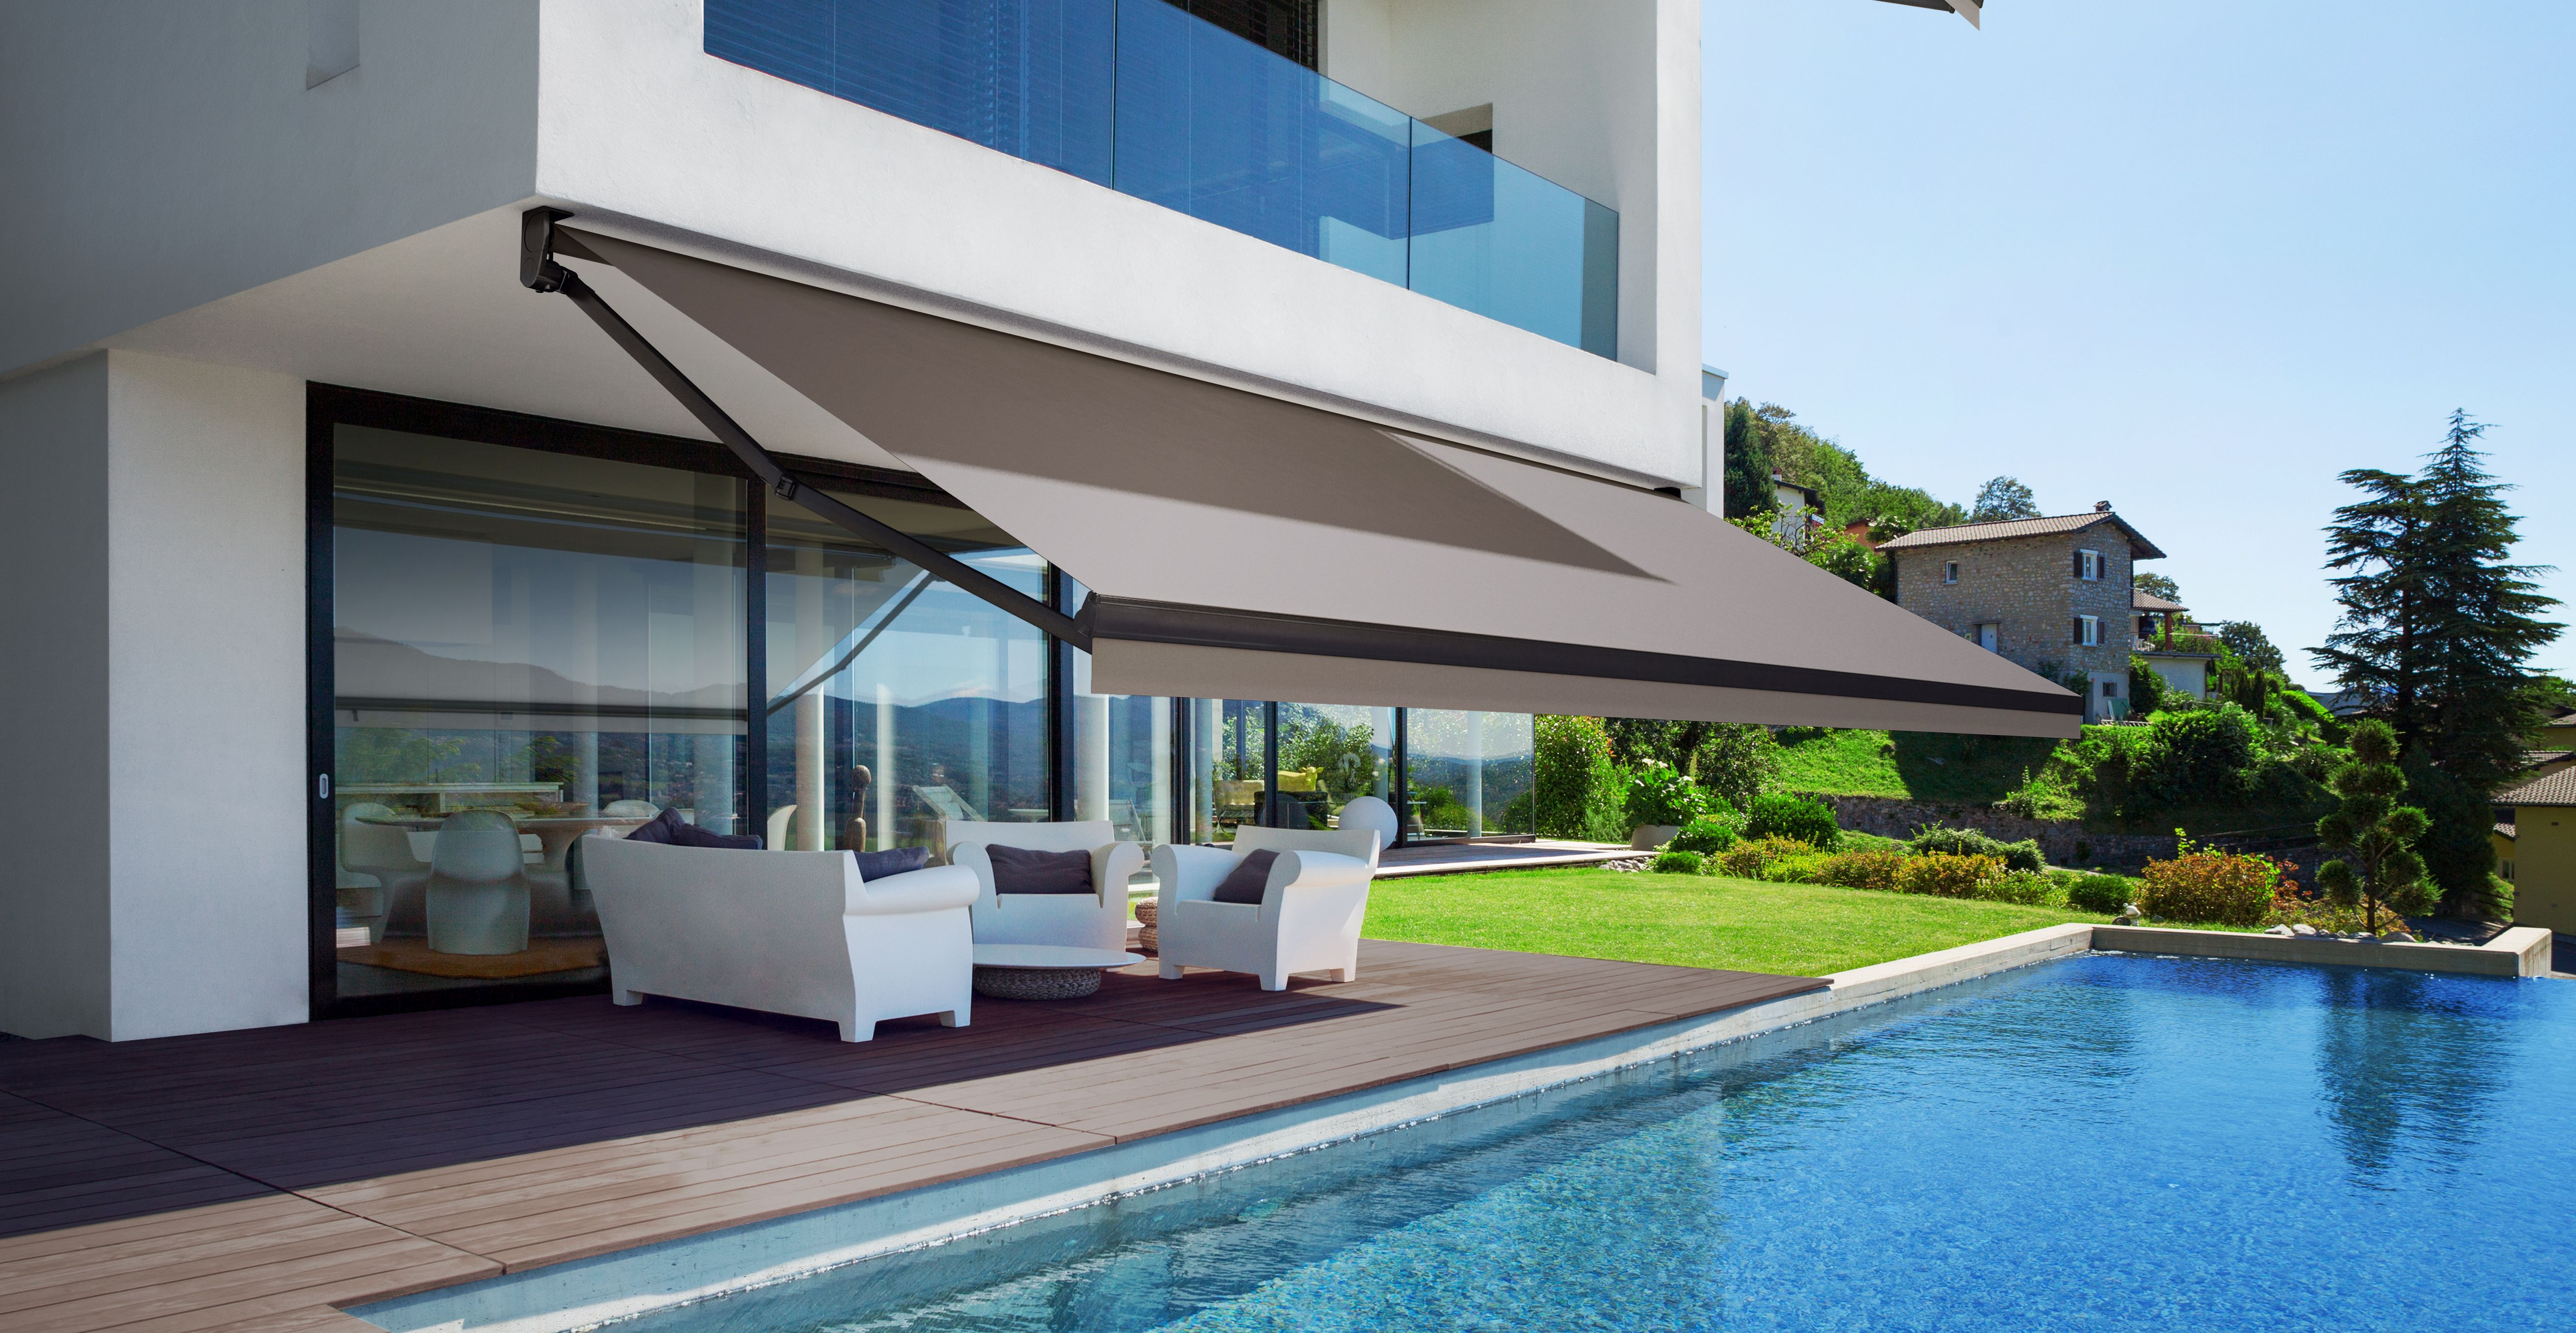 Retractable Awnings And Canopies Manual And Motorized for size 5234 X 2709